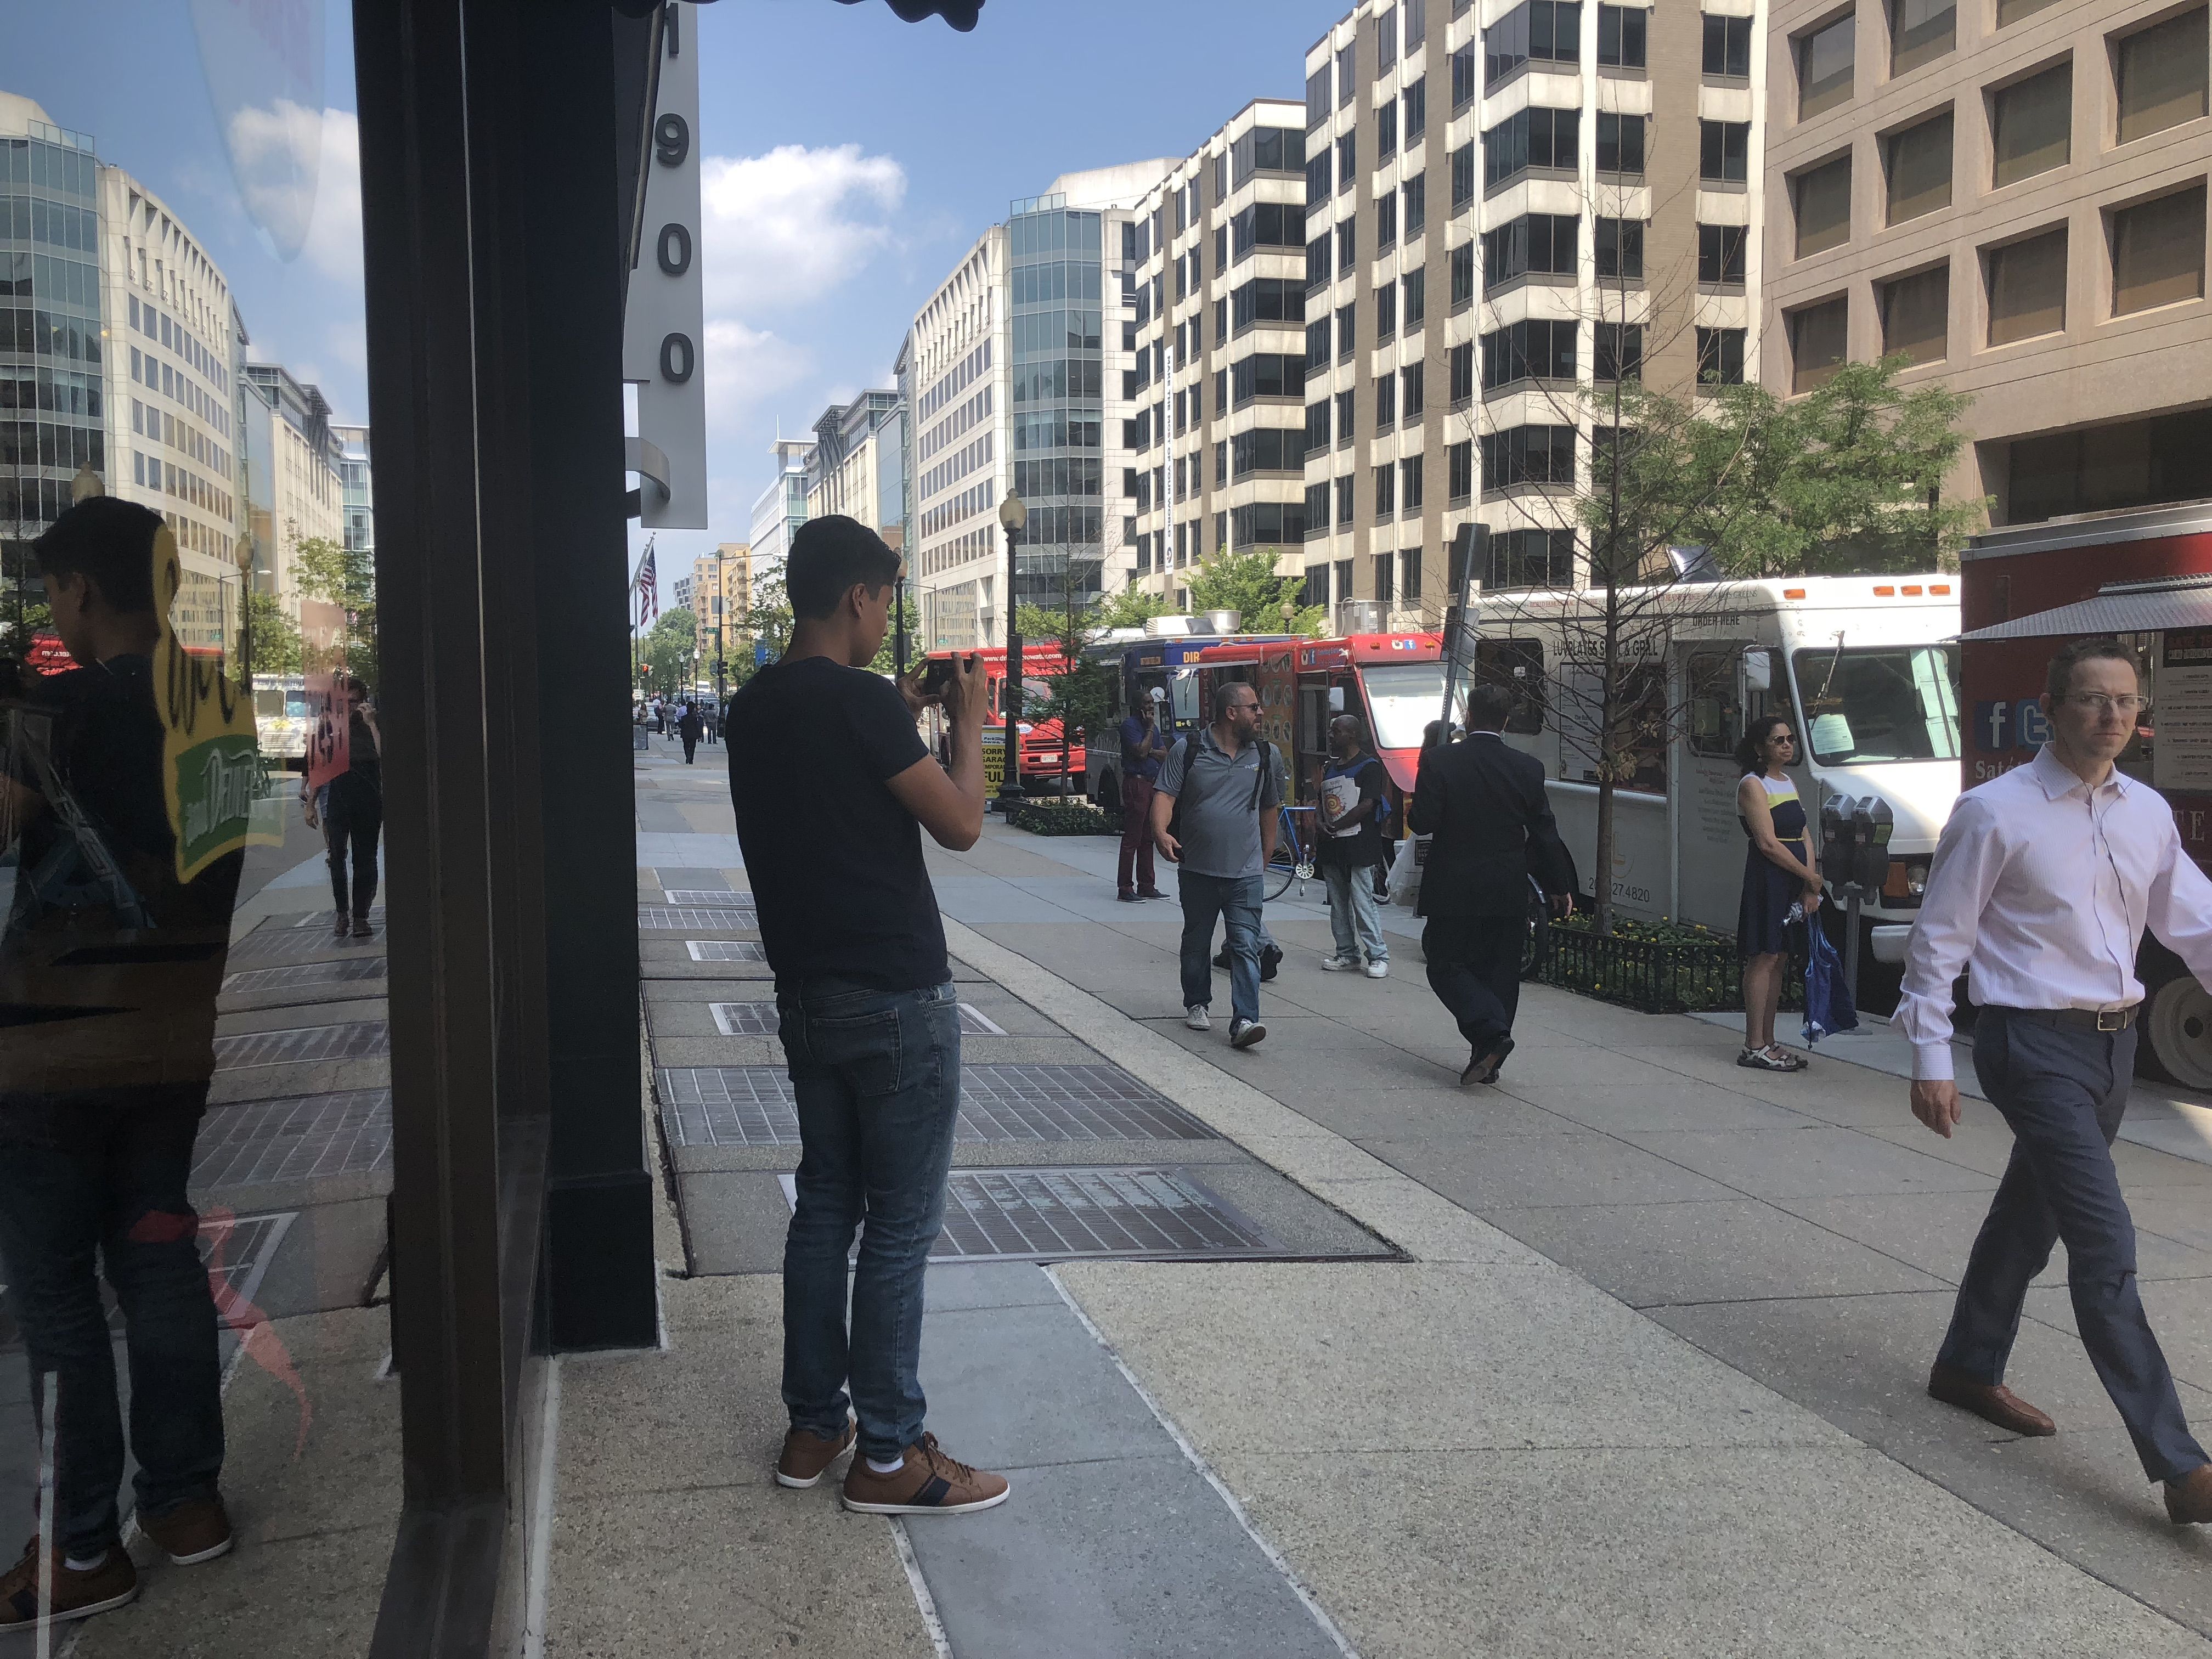 A participant in the Tomodachi Youth Exchange program observes the people walking along a street in Washington, D.C. Image by Kayla Edwards. United States, 2018. 